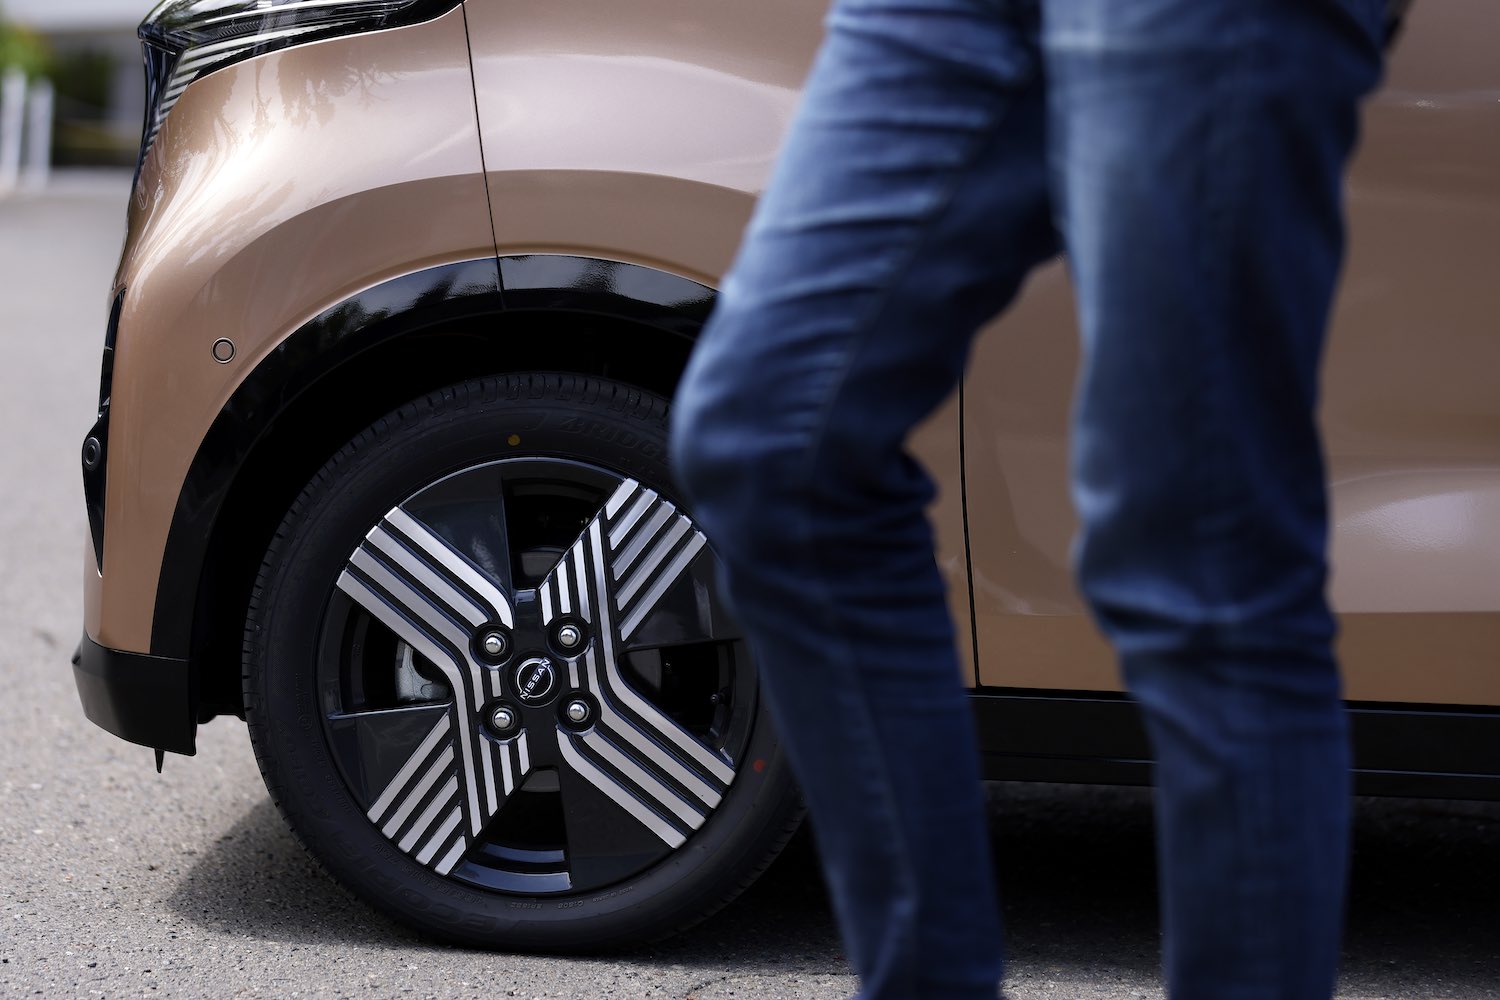 Closeup of the wheel and tire of a Nissan Sakura KEI-class EV, a person walking by in the foreground.